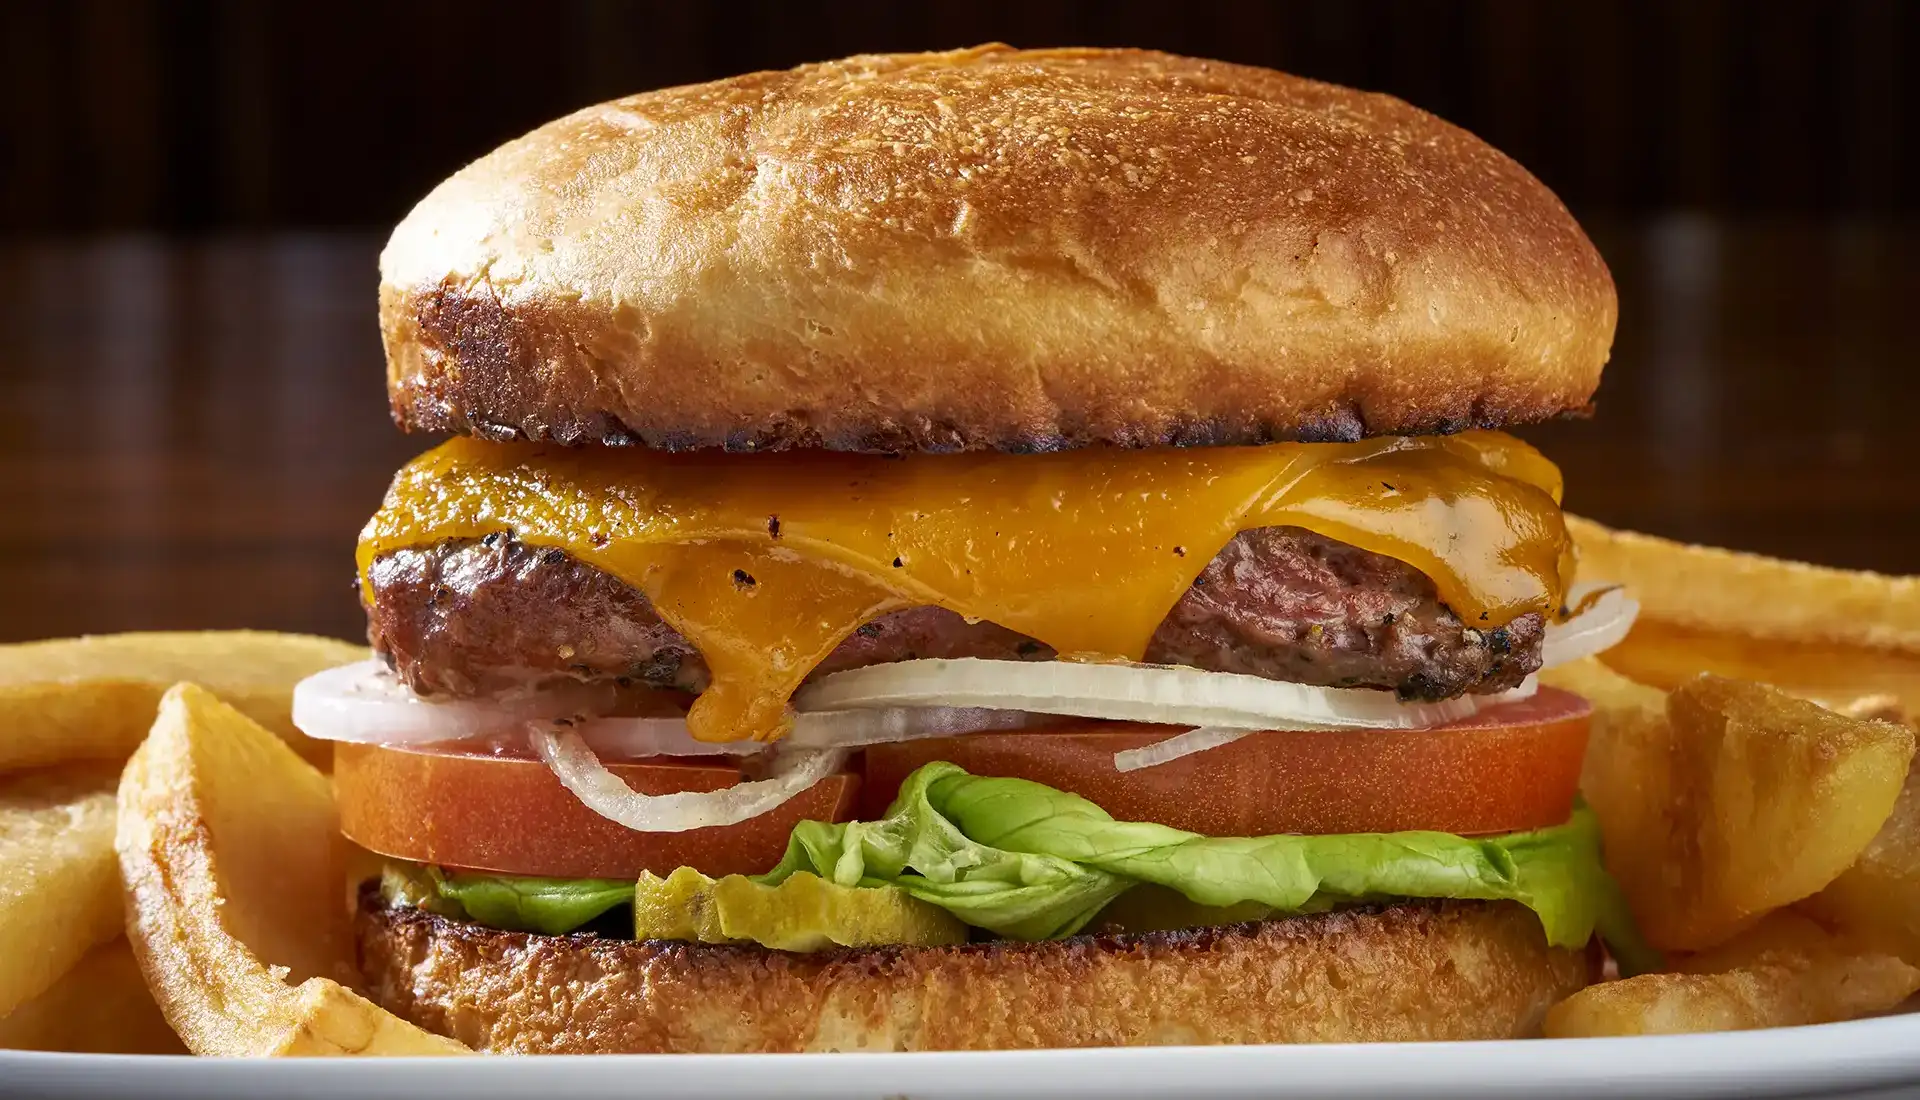 We top our Angus burger with Cheddar cheese, pickles, onions, tomatoes and Boston Bibb lettuce on a homemade bun.